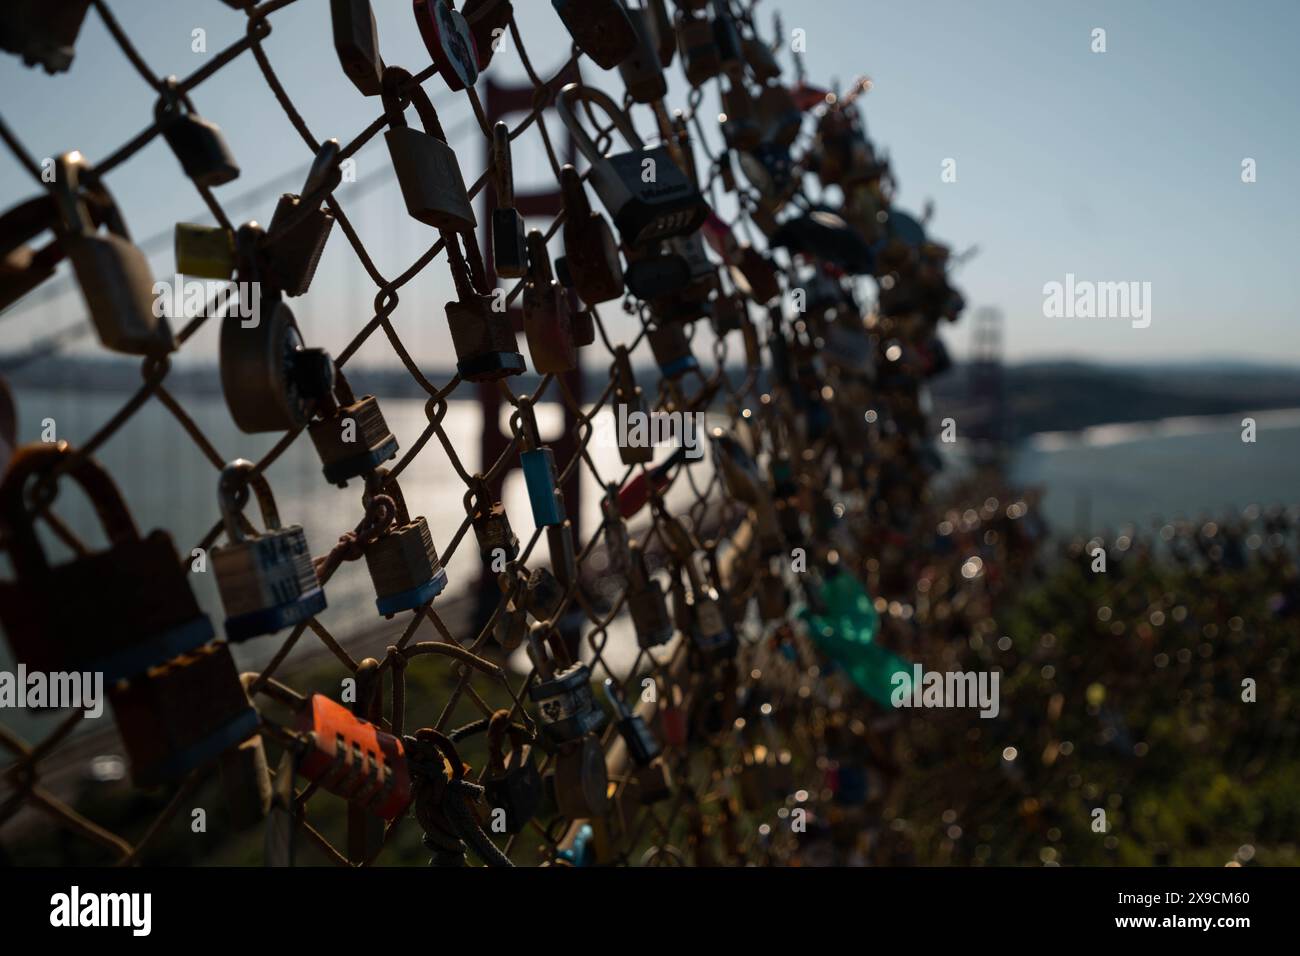 Locking the love against the iconic backdrop of San Francisco's Golden Gate bridge, where hearts intertwine and dreams take flight. Stock Photo